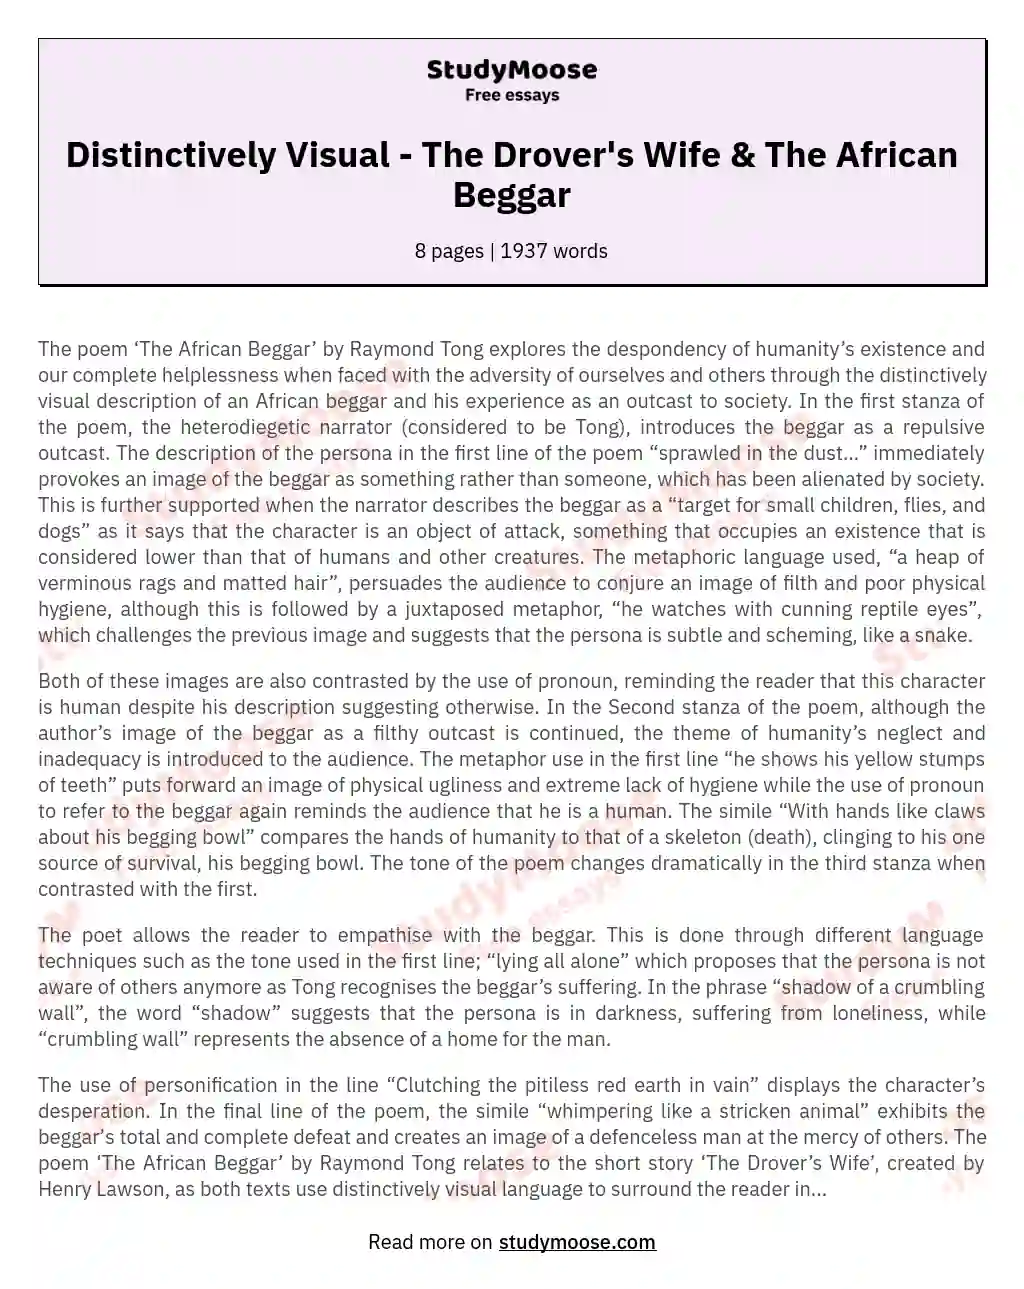 Distinctively Visual - The Drover's Wife & The African Beggar essay